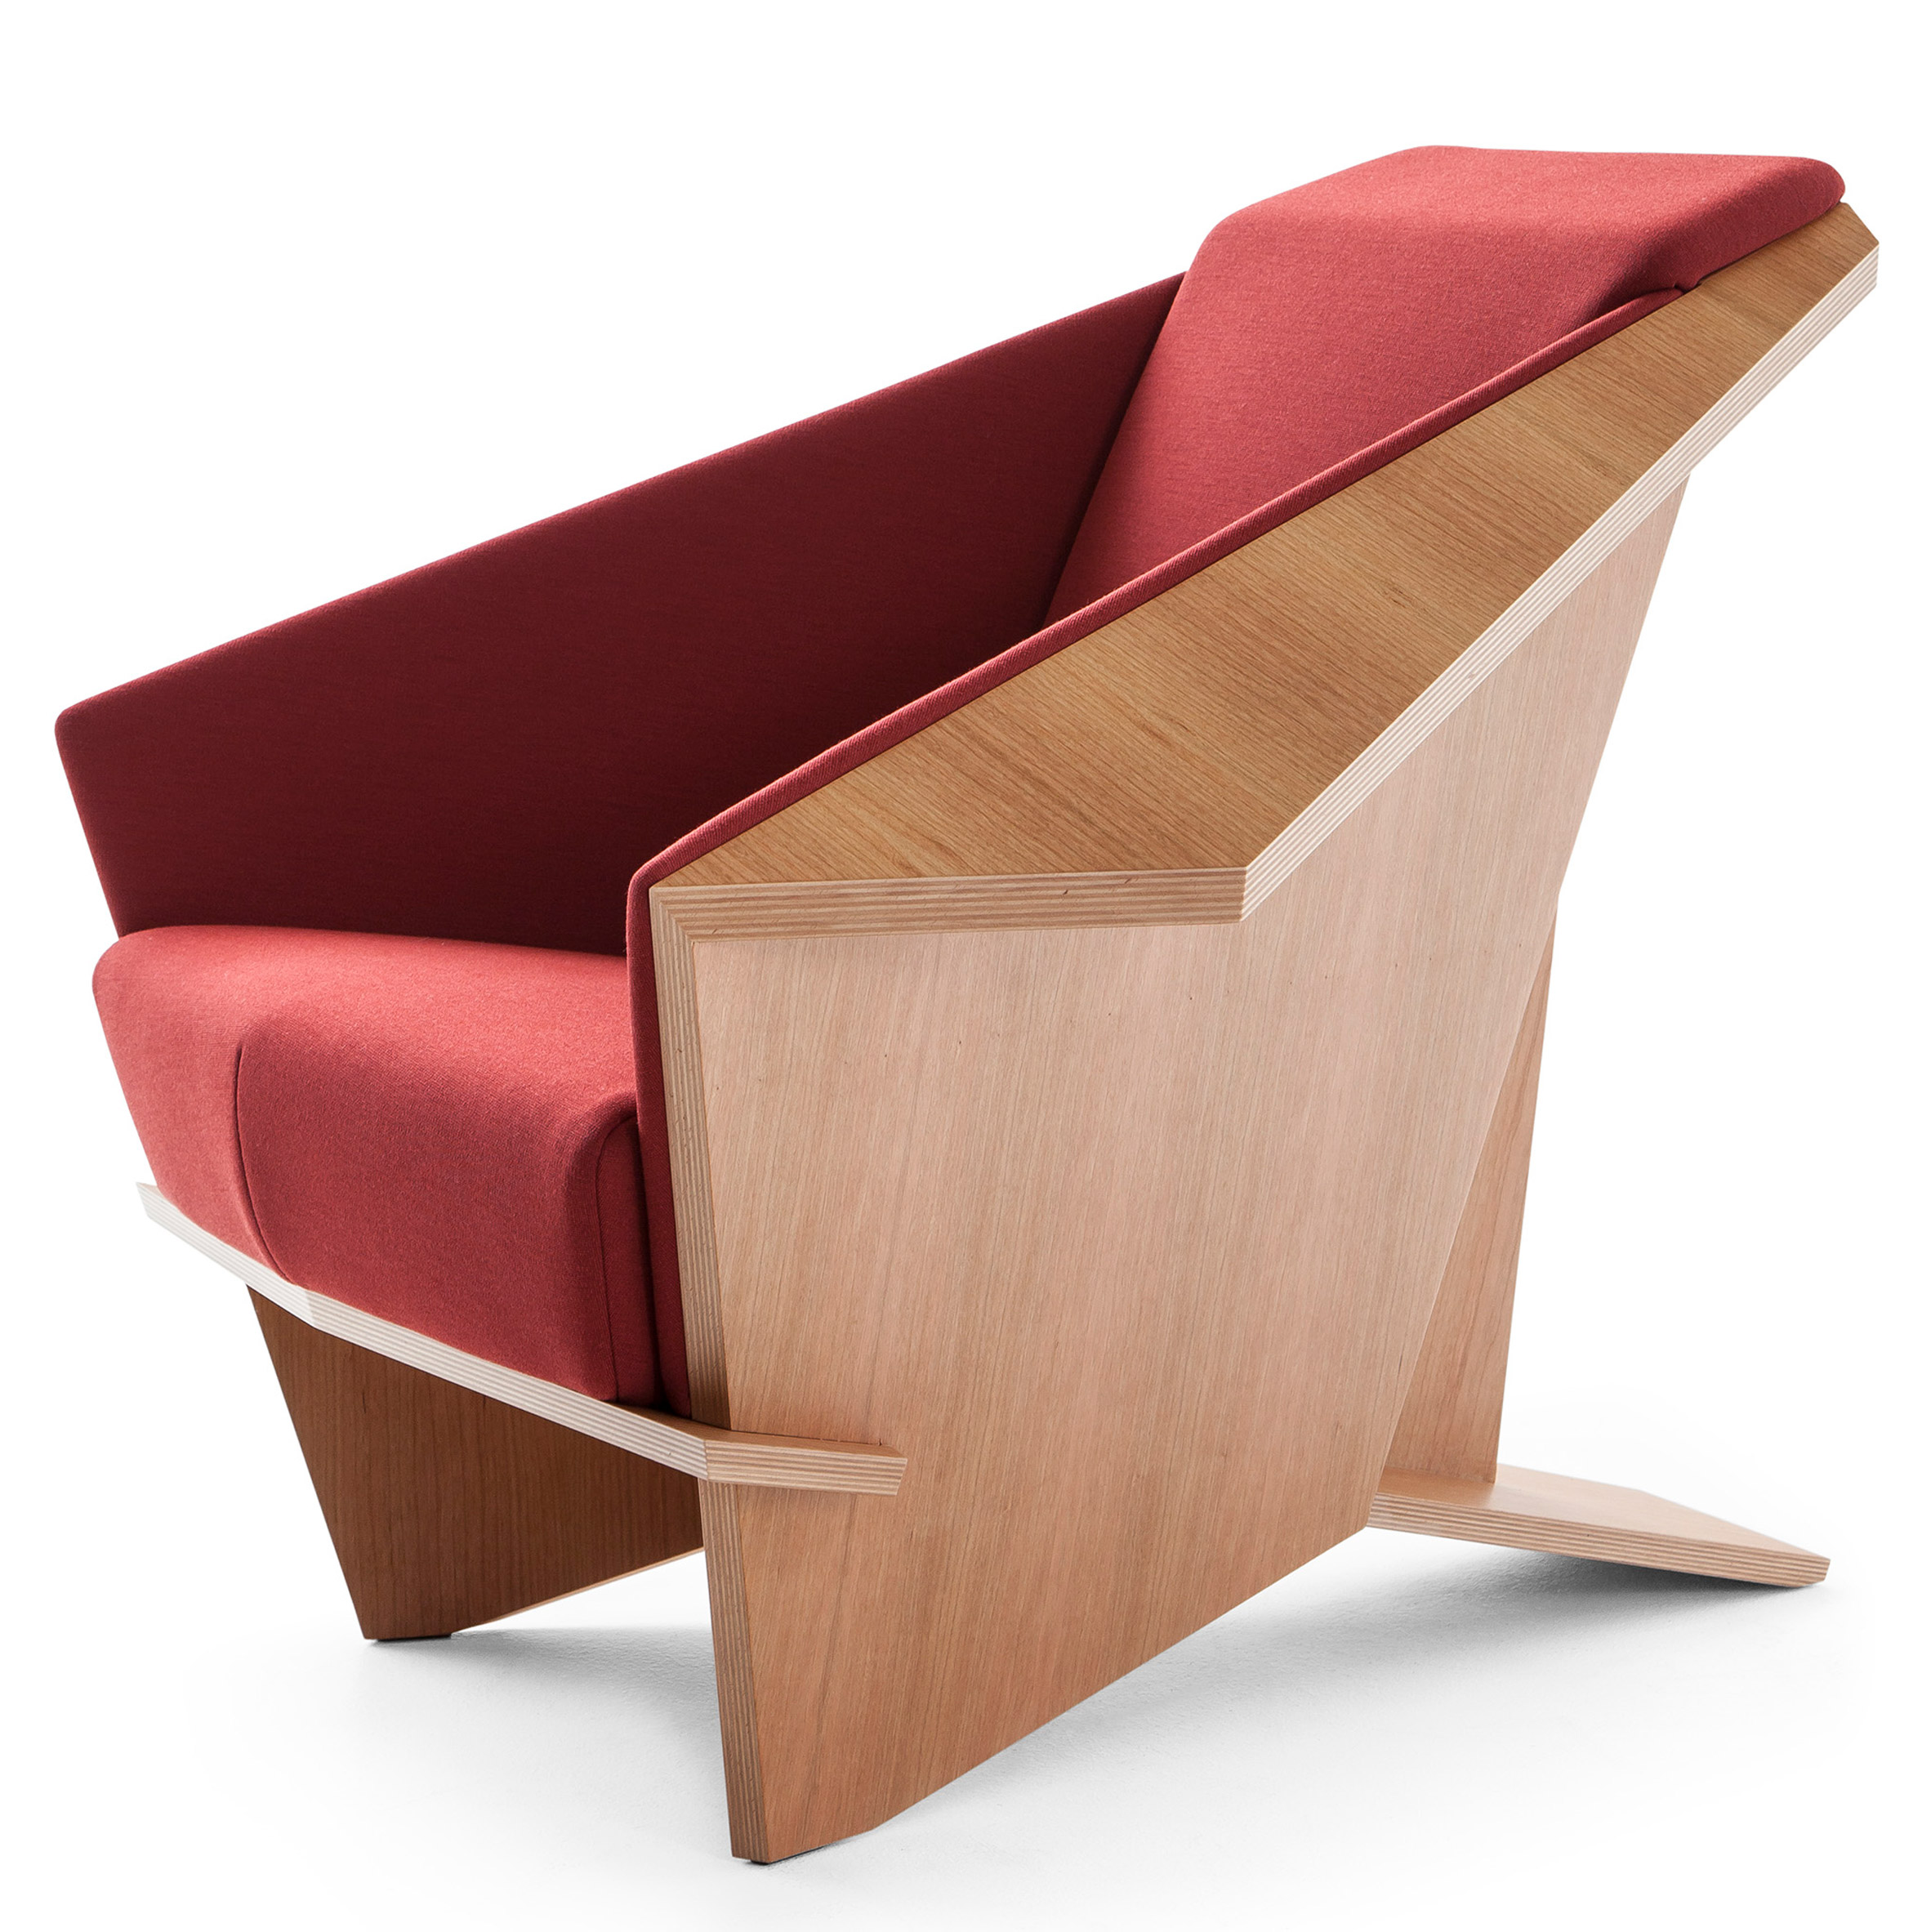 Taliesin chair by Frank Lloyd Wright reissued by Cassina